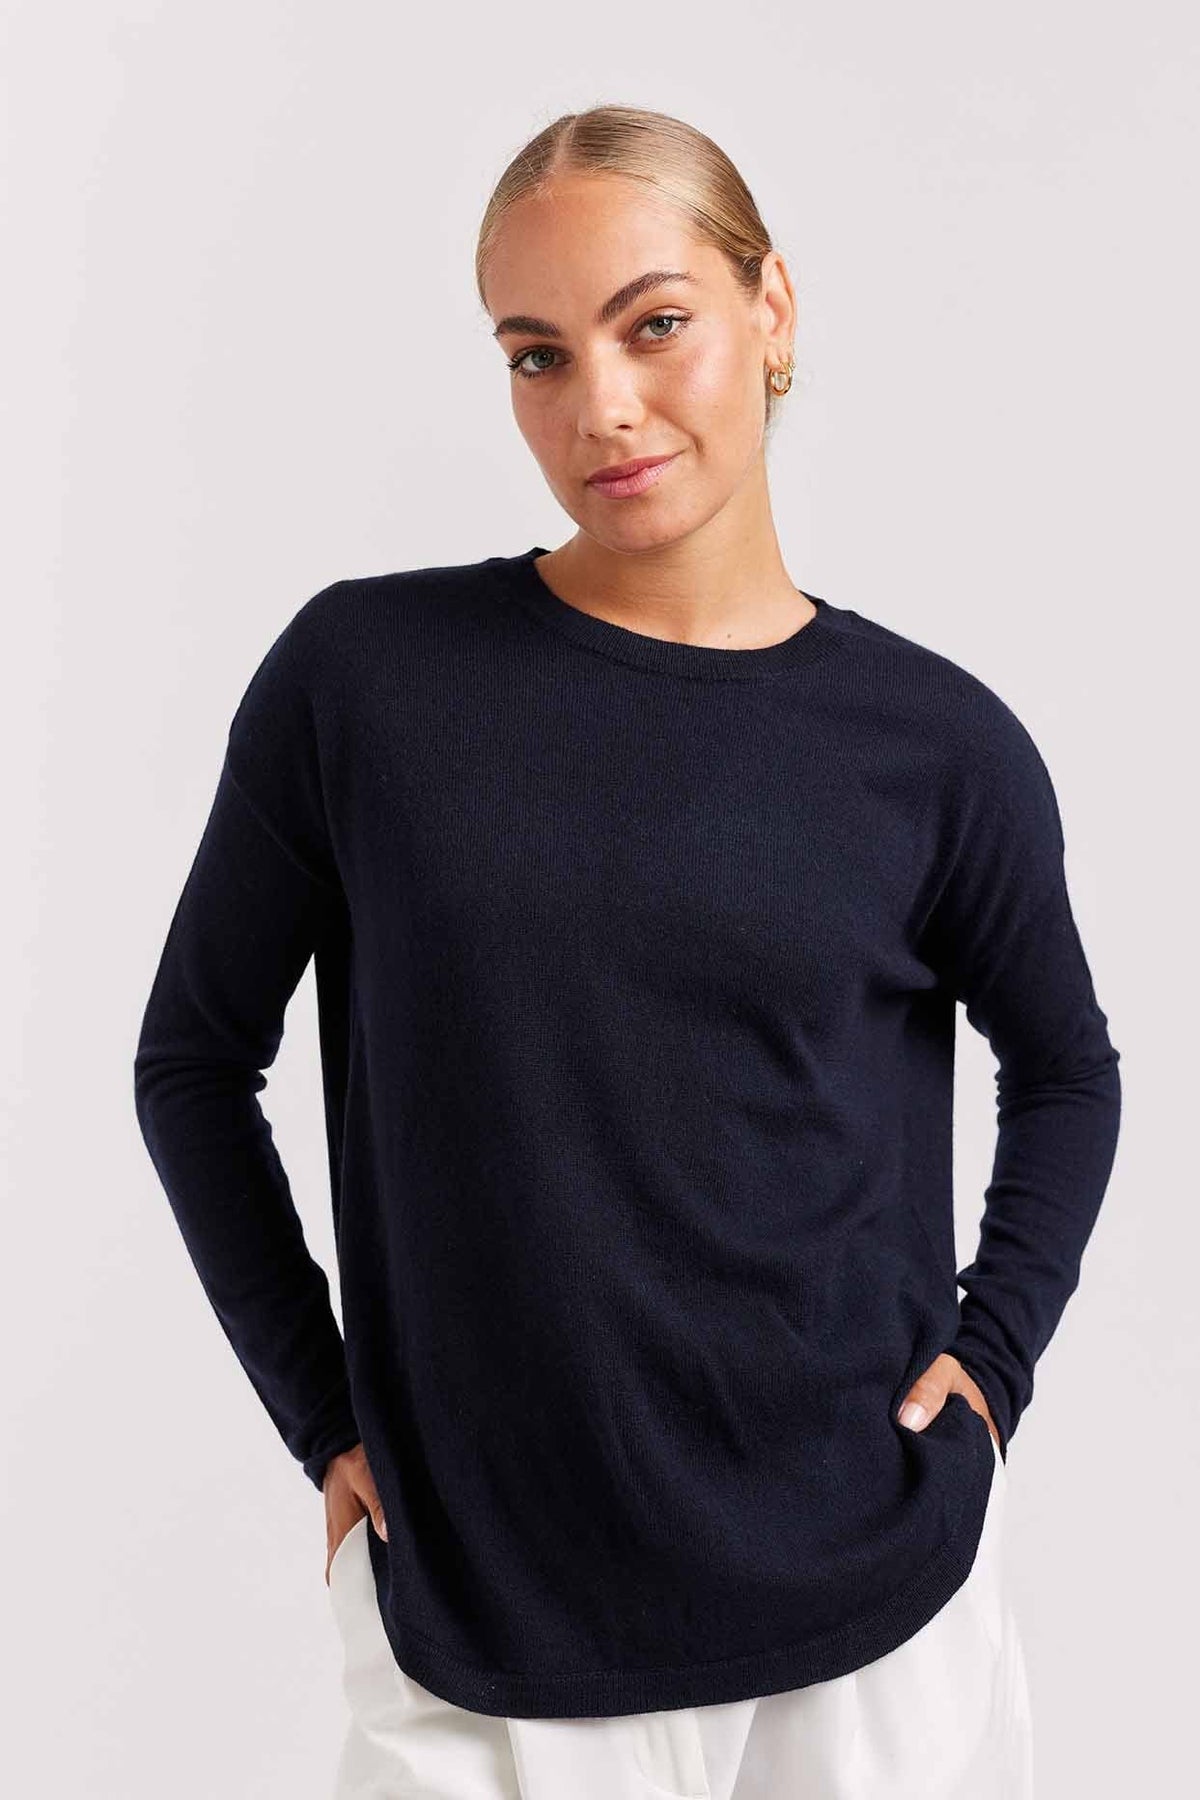 Alessandra Baby Belle Cashmere Sweater in Navy Blue